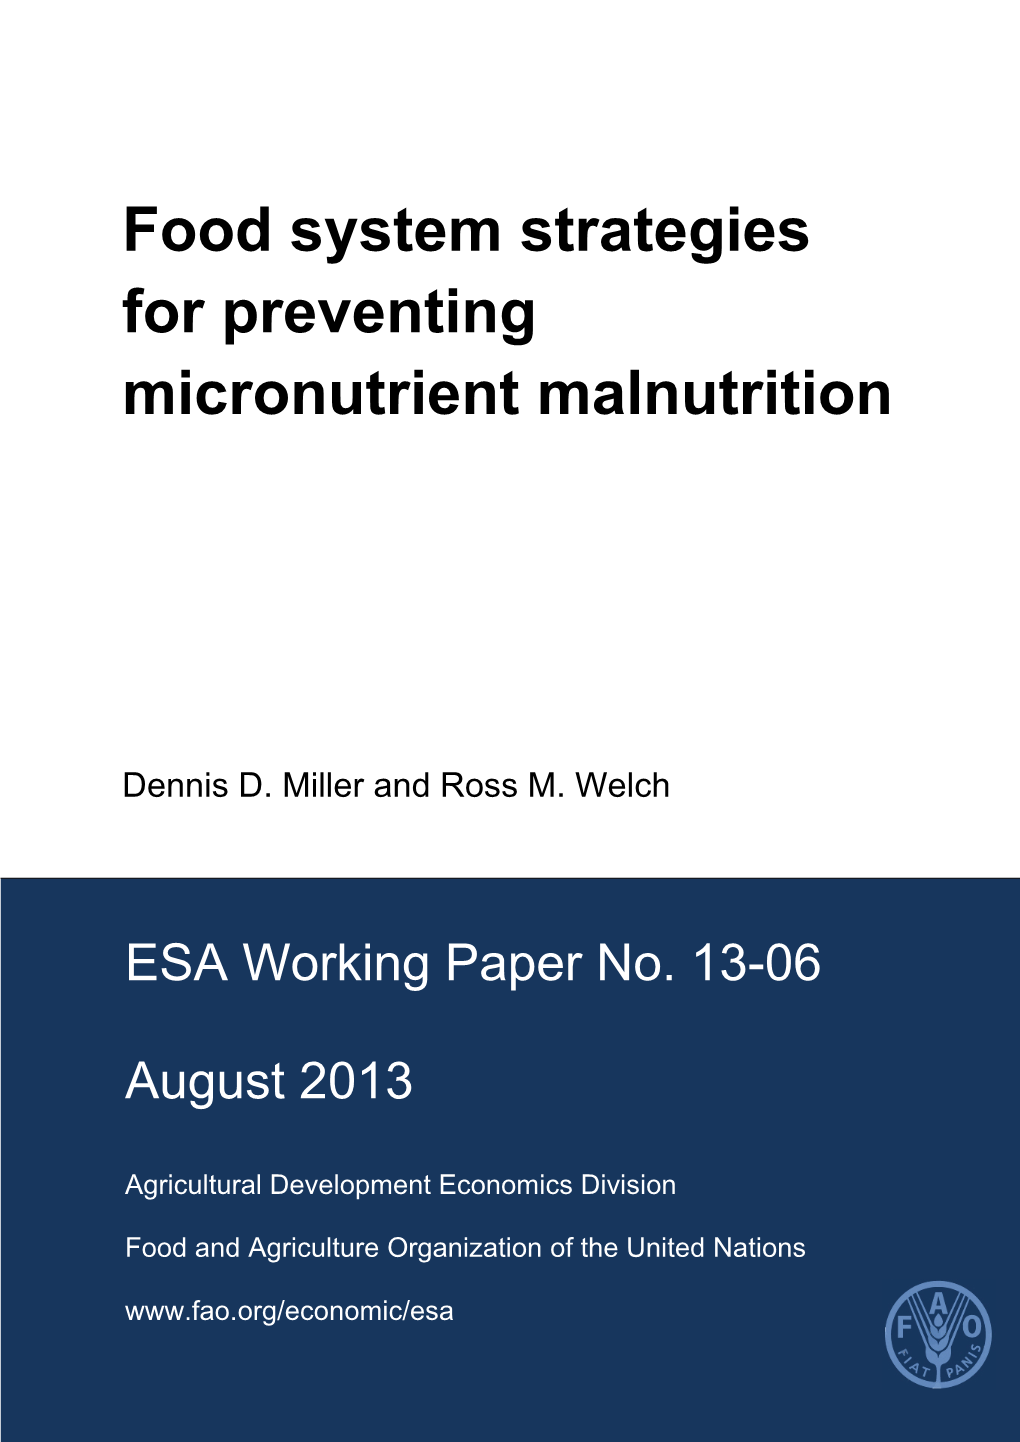 Food System Strategies for Preventing Micronutrient Malnutrition